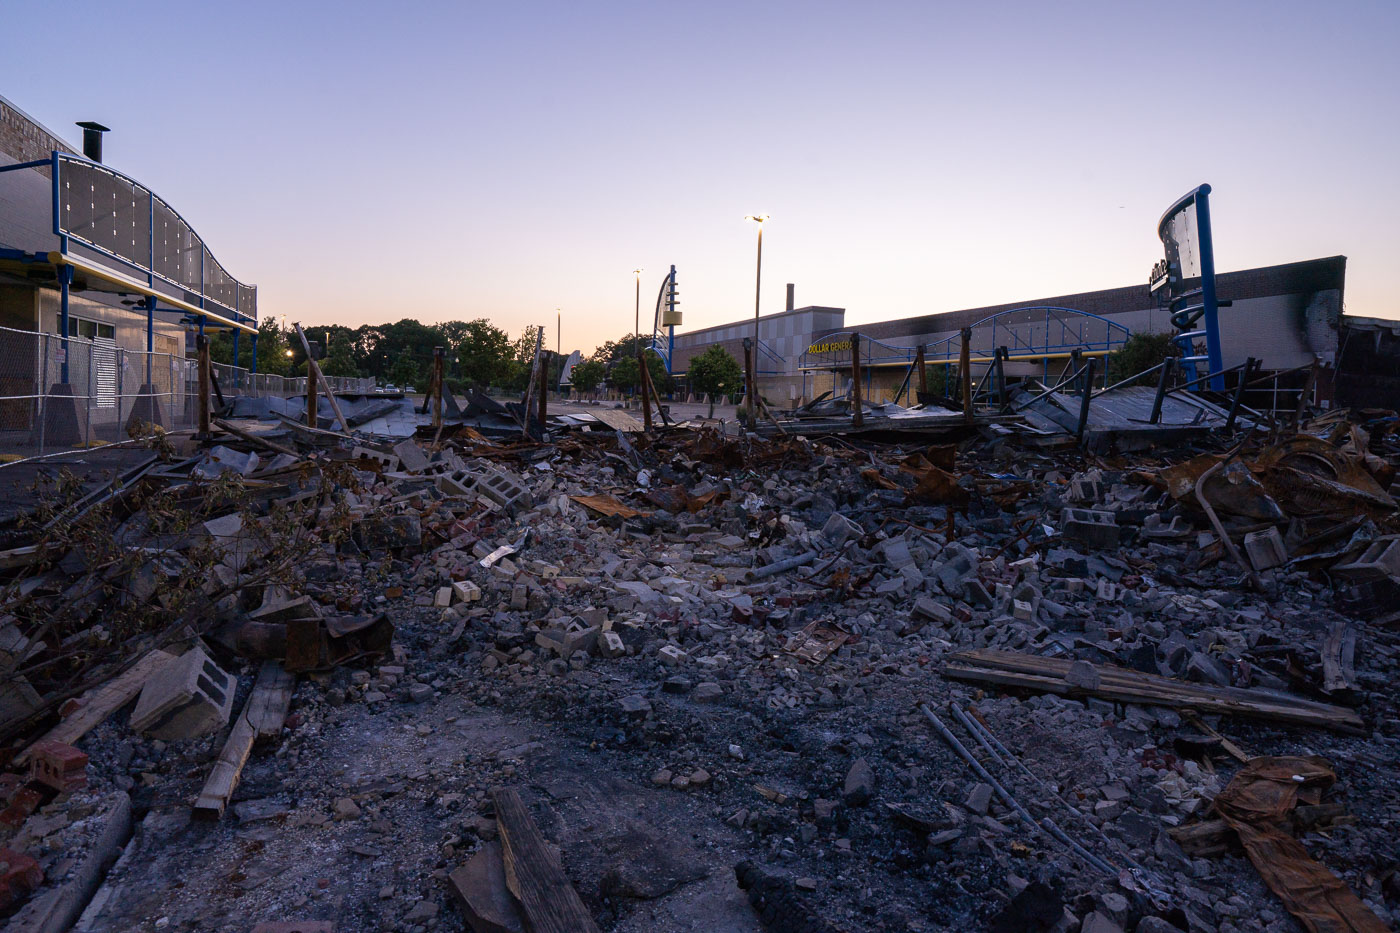 Strip mall rubble after riots